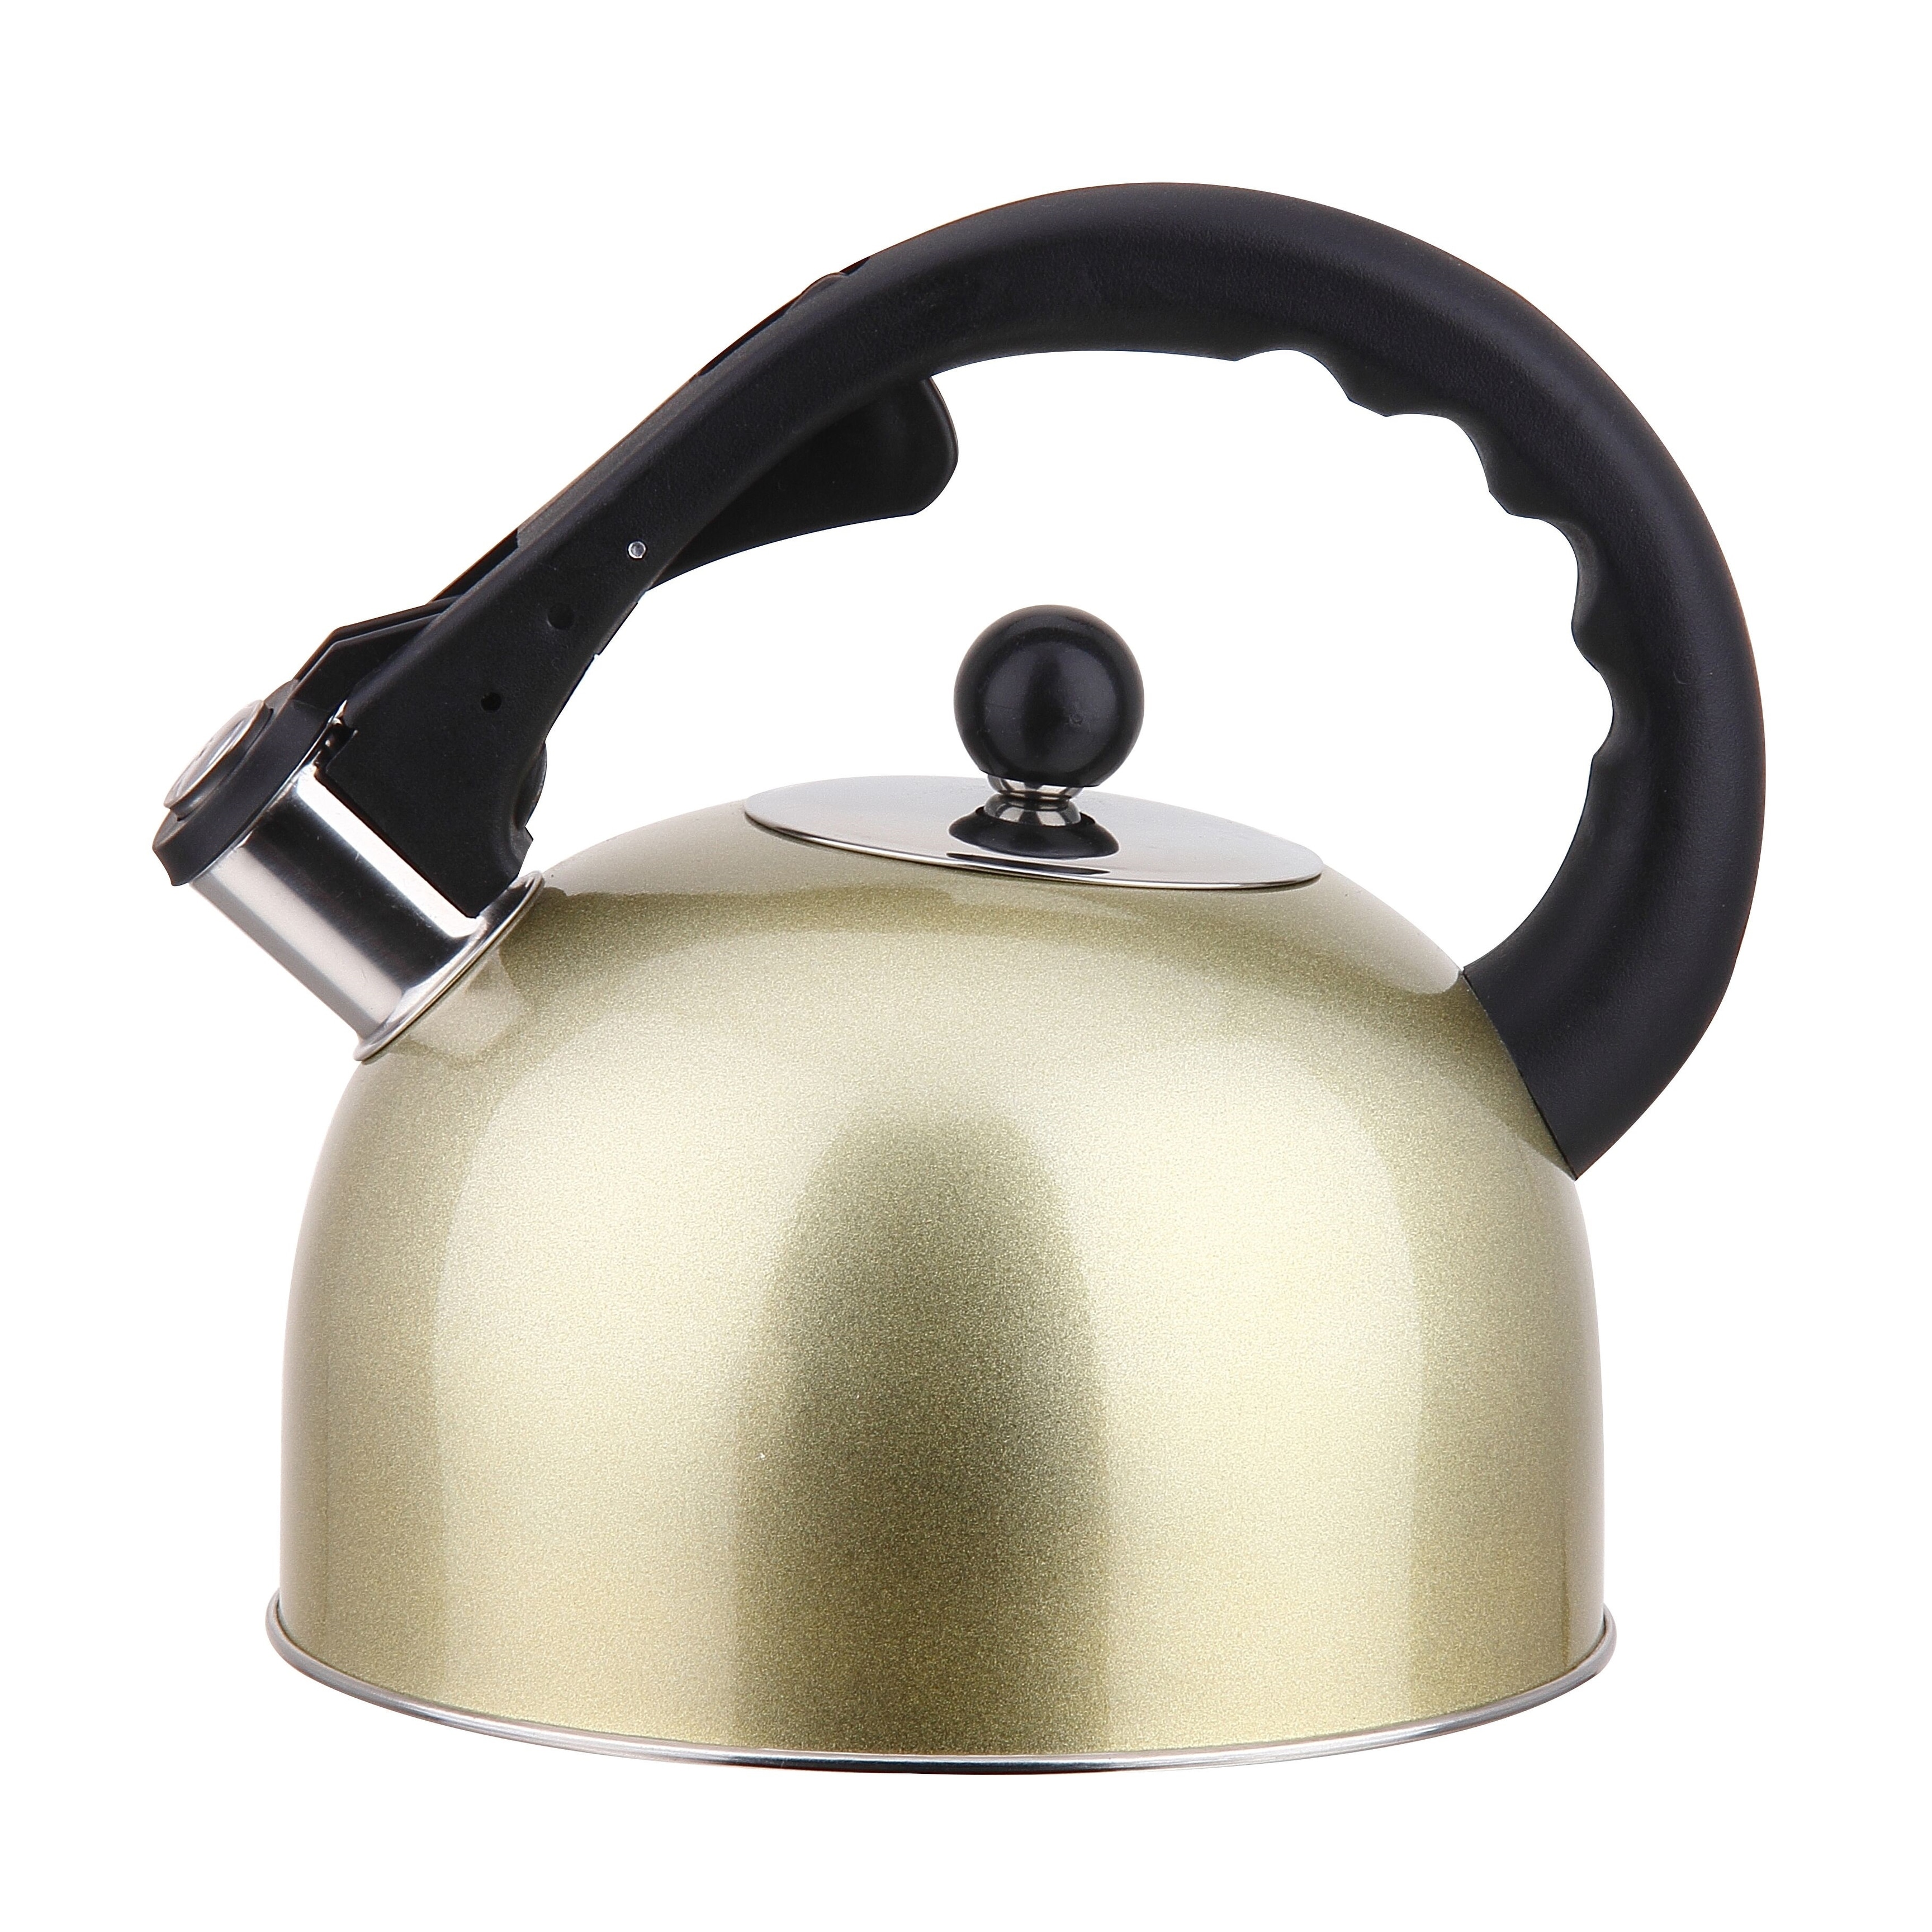 https://ak1.ostkcdn.com/images/products/is/images/direct/e8294679f2768d0dccaa0e54693a29577ae82760/Stainless-Steel-Stovetop-Whistling-Tea-Kettle-3L%2C-Induction-Compatible.jpg